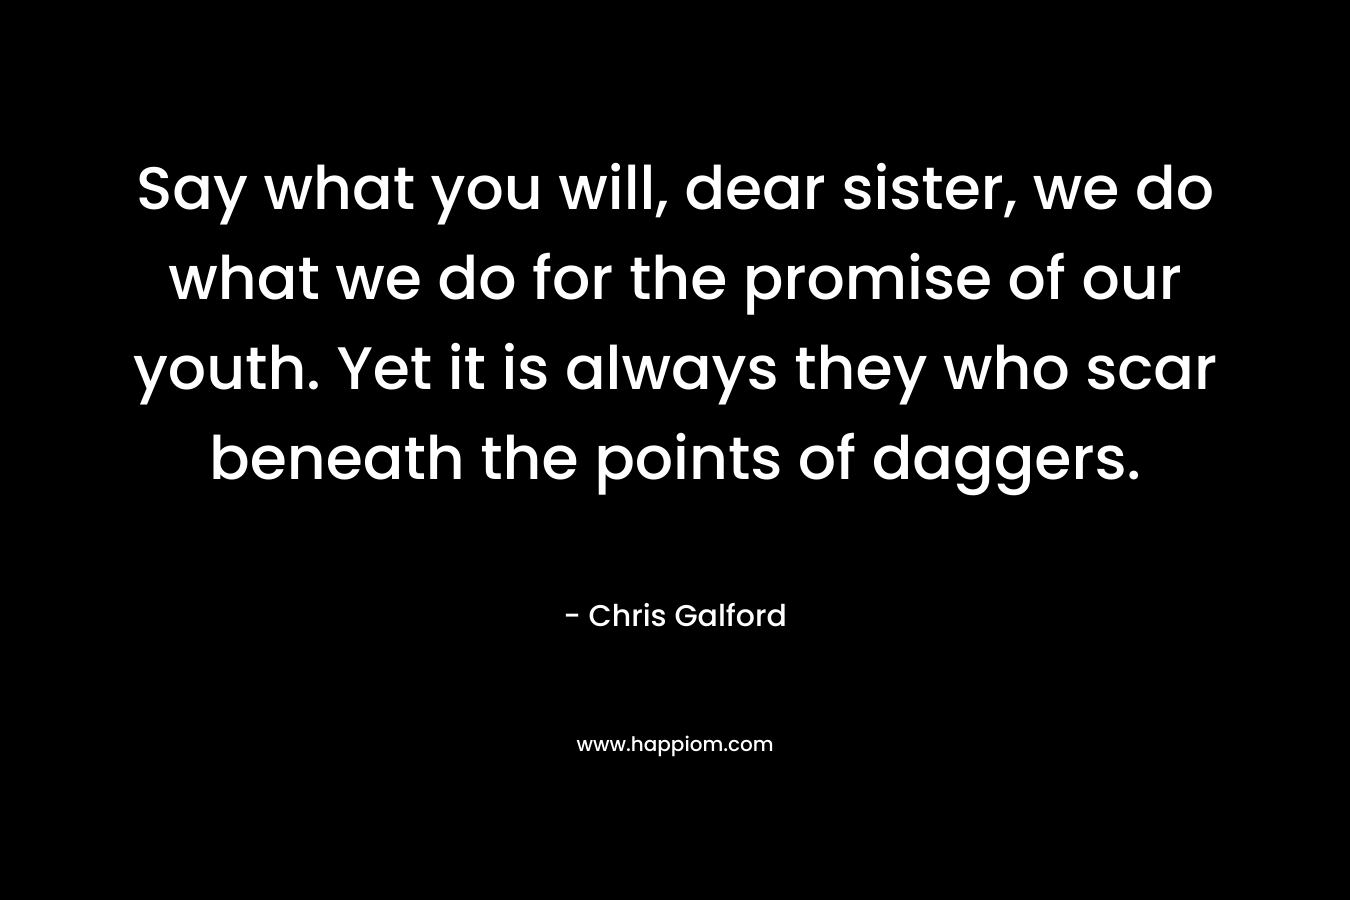 Say what you will, dear sister, we do what we do for the promise of our youth. Yet it is always they who scar beneath the points of daggers.